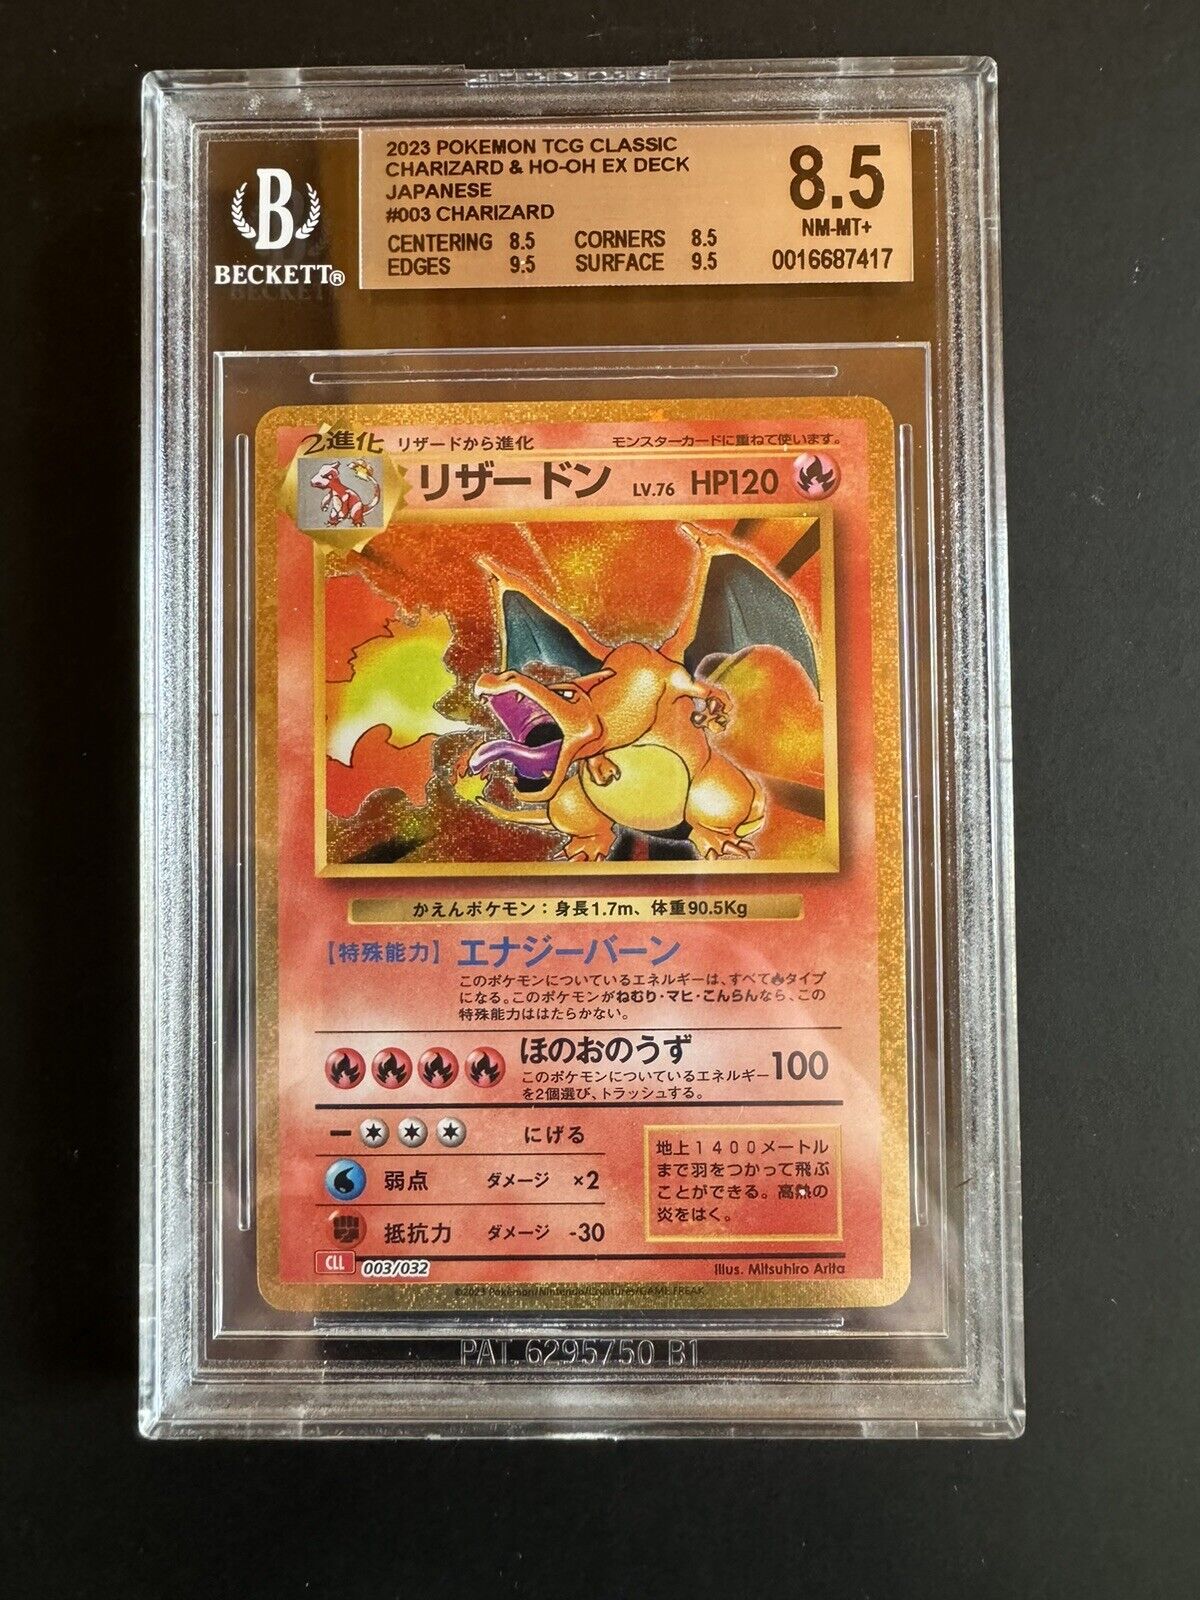 BGS 8.5 Charizard Holo 003/032 CLL Japanese Pokemon Trading Card Game Classic